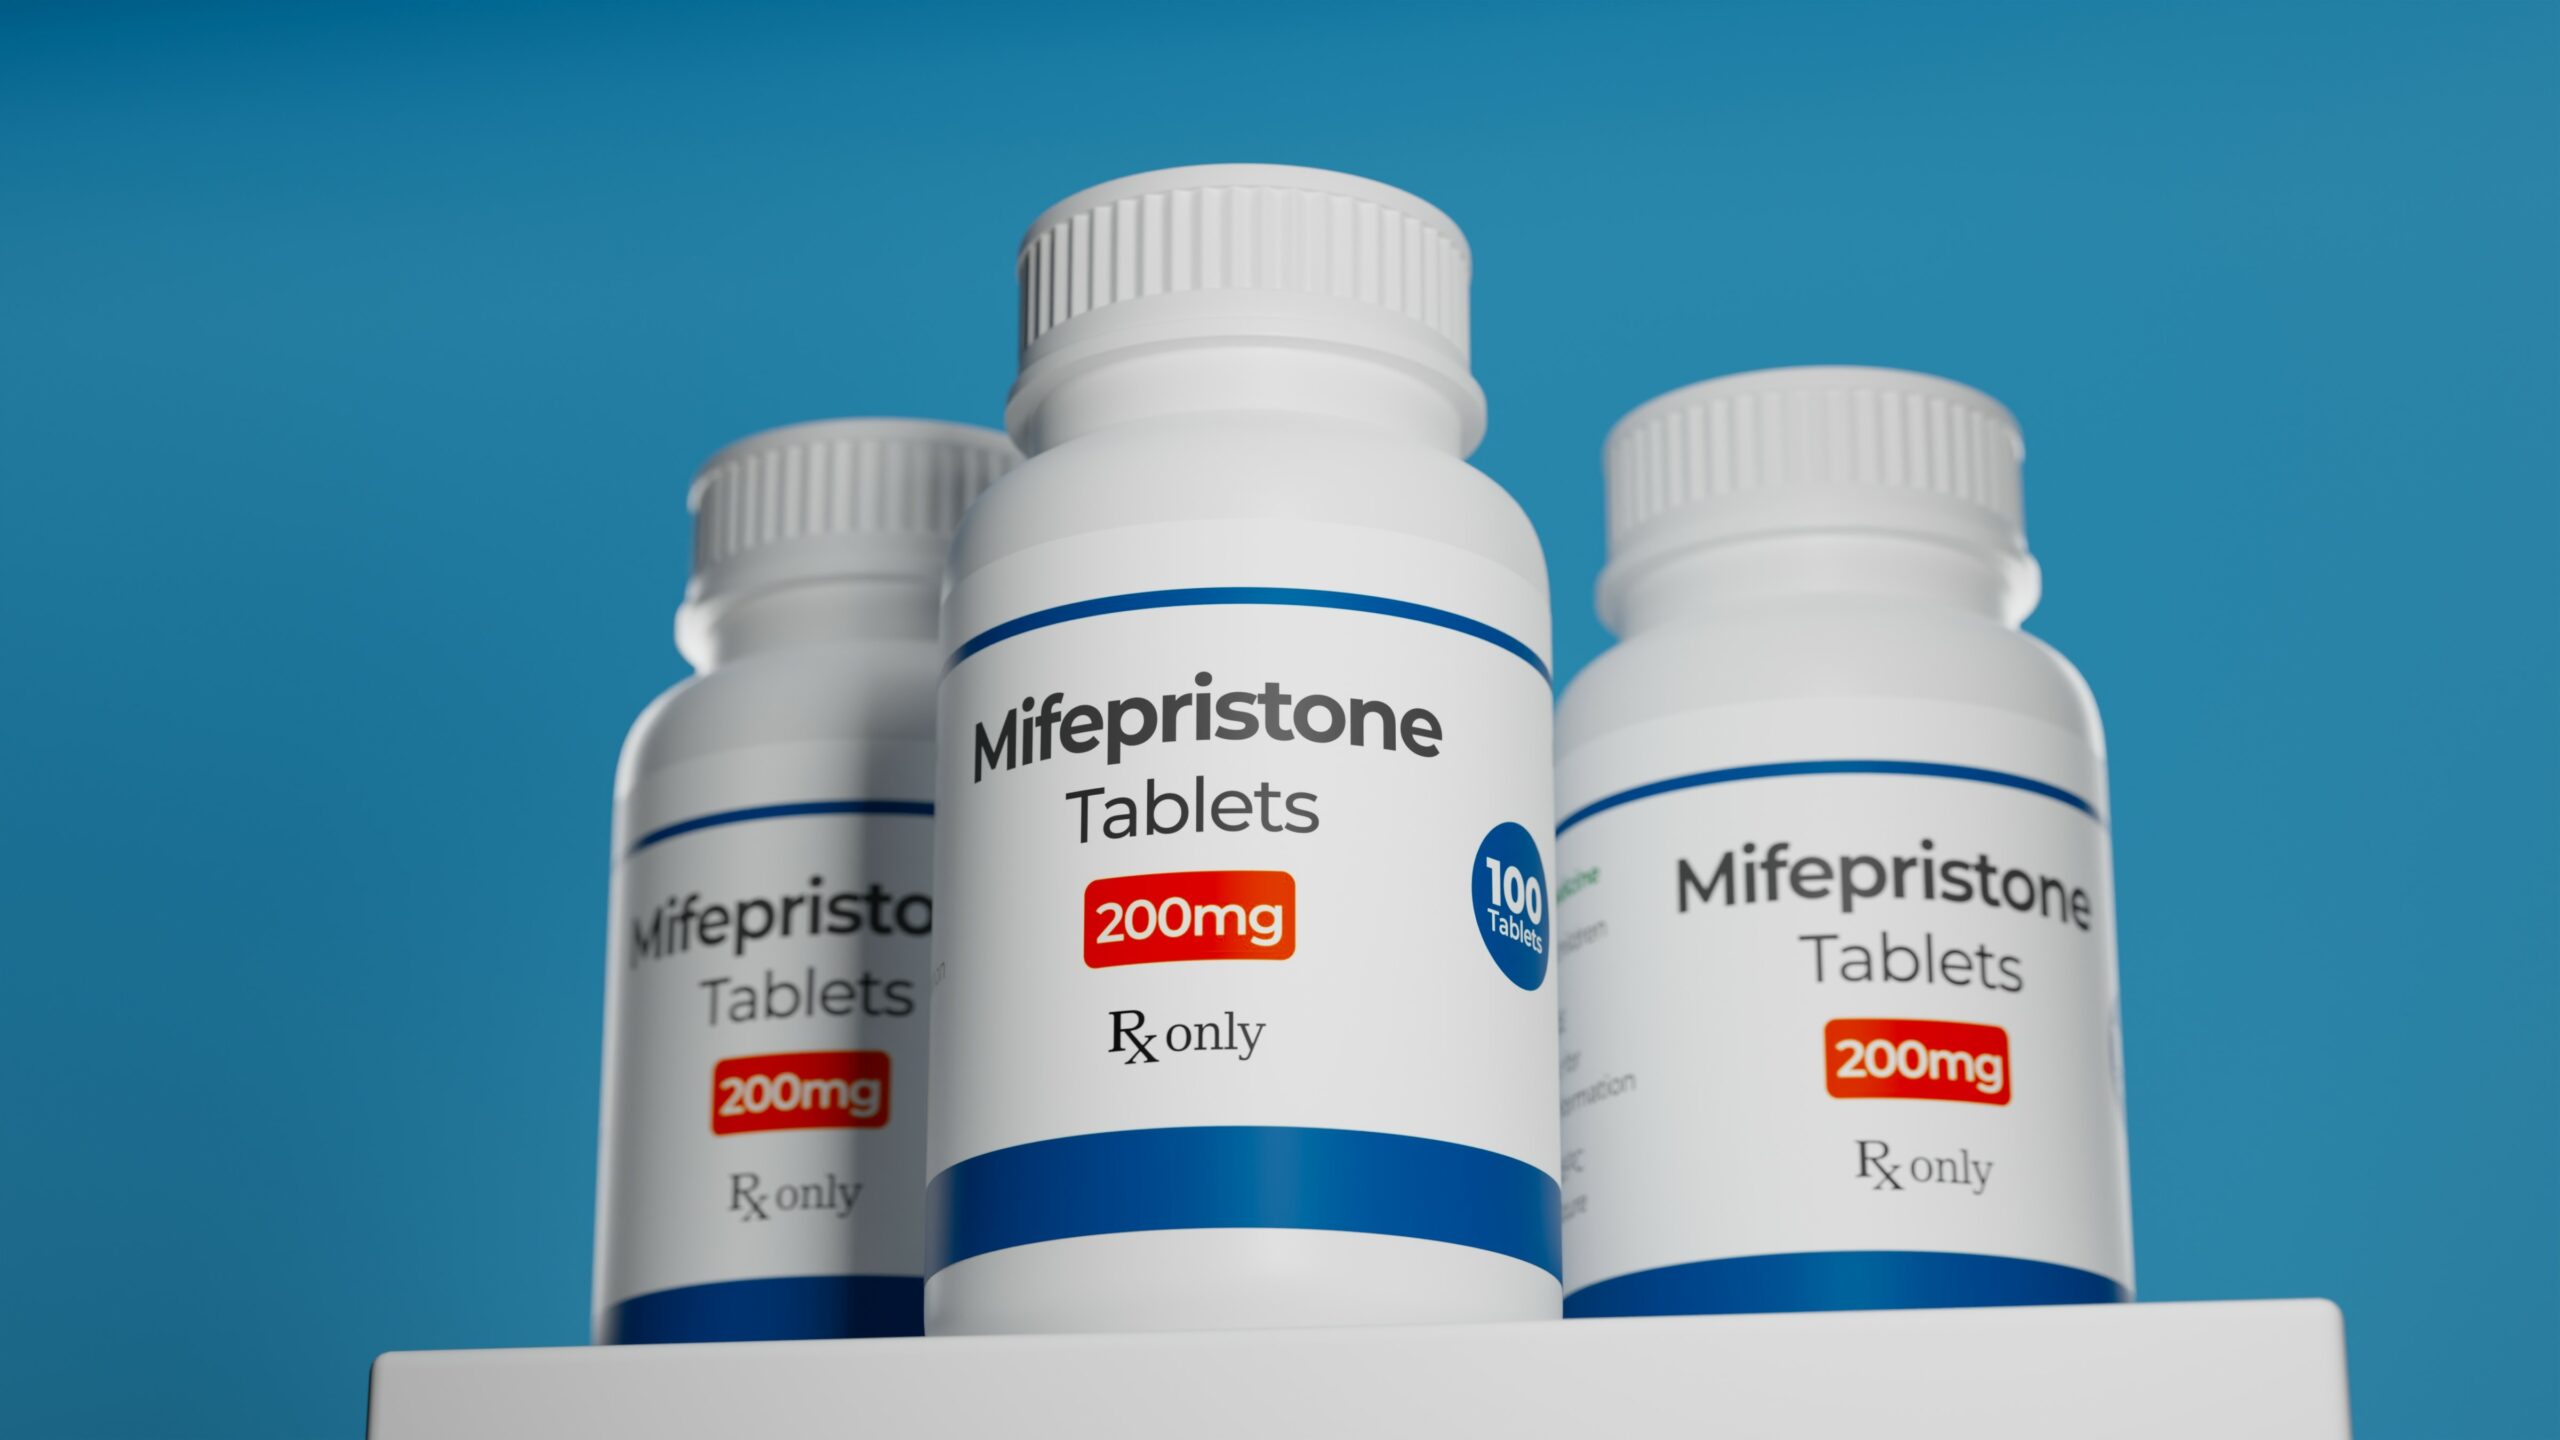 Mifepristone tablets in bottle. RU-486 Medical abortion pills. Used in combination with misoprostol. 3D illustration.